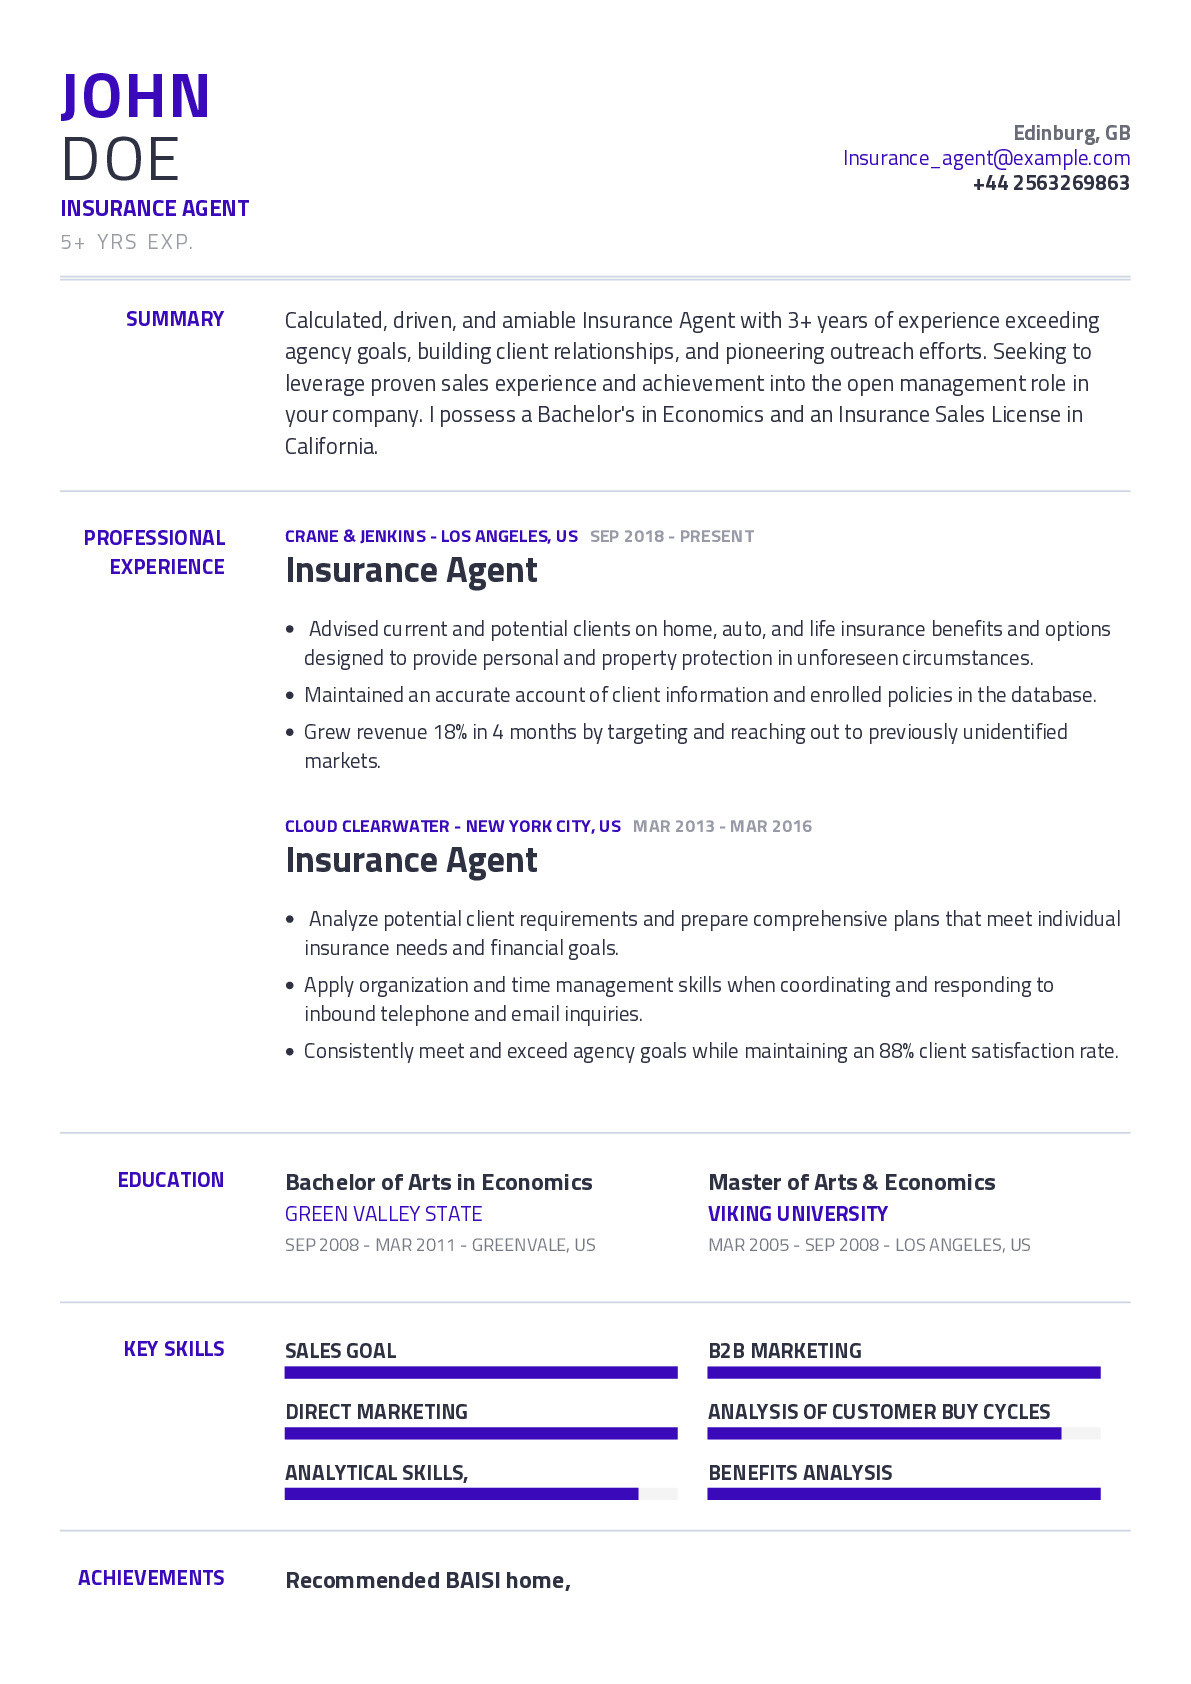 Sample Resume for Property and Casualty Insurance Agent Insurance Agent Resume Example with Content Sample Craftmycv